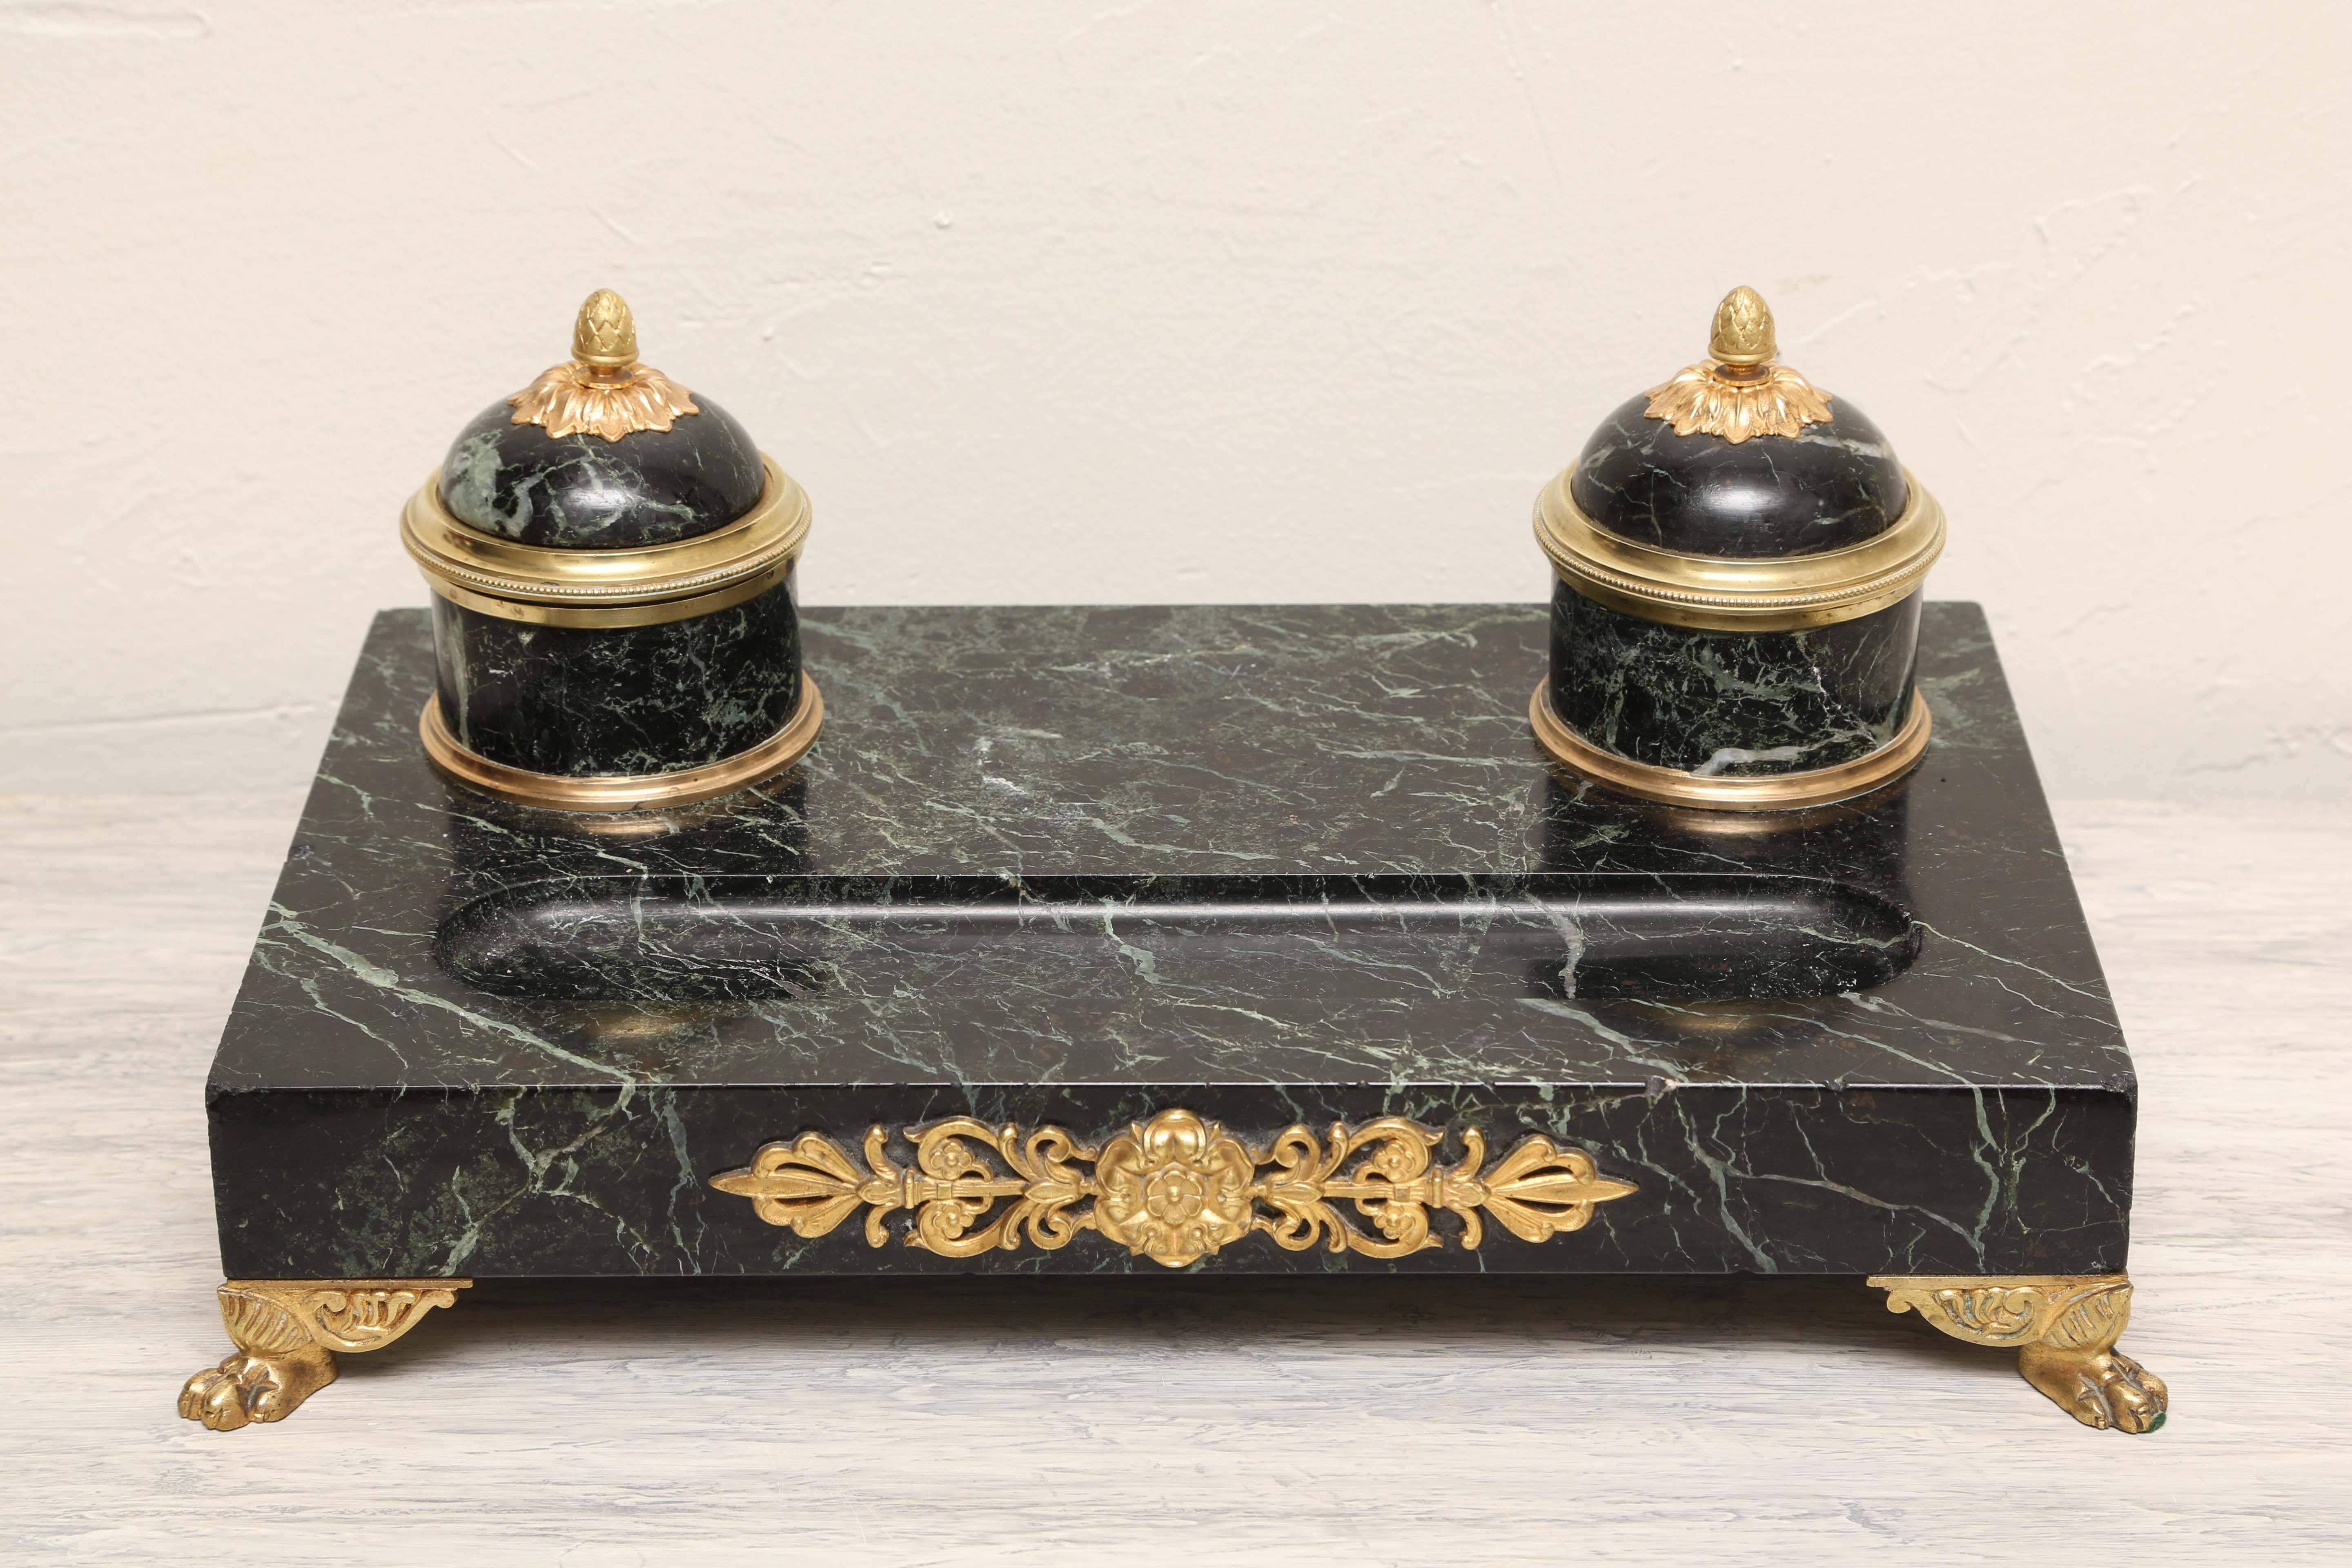 Outstanding marble and bronze antique neoclassical inkwell done with great detail. Made in France in the latter part of the 19th century.